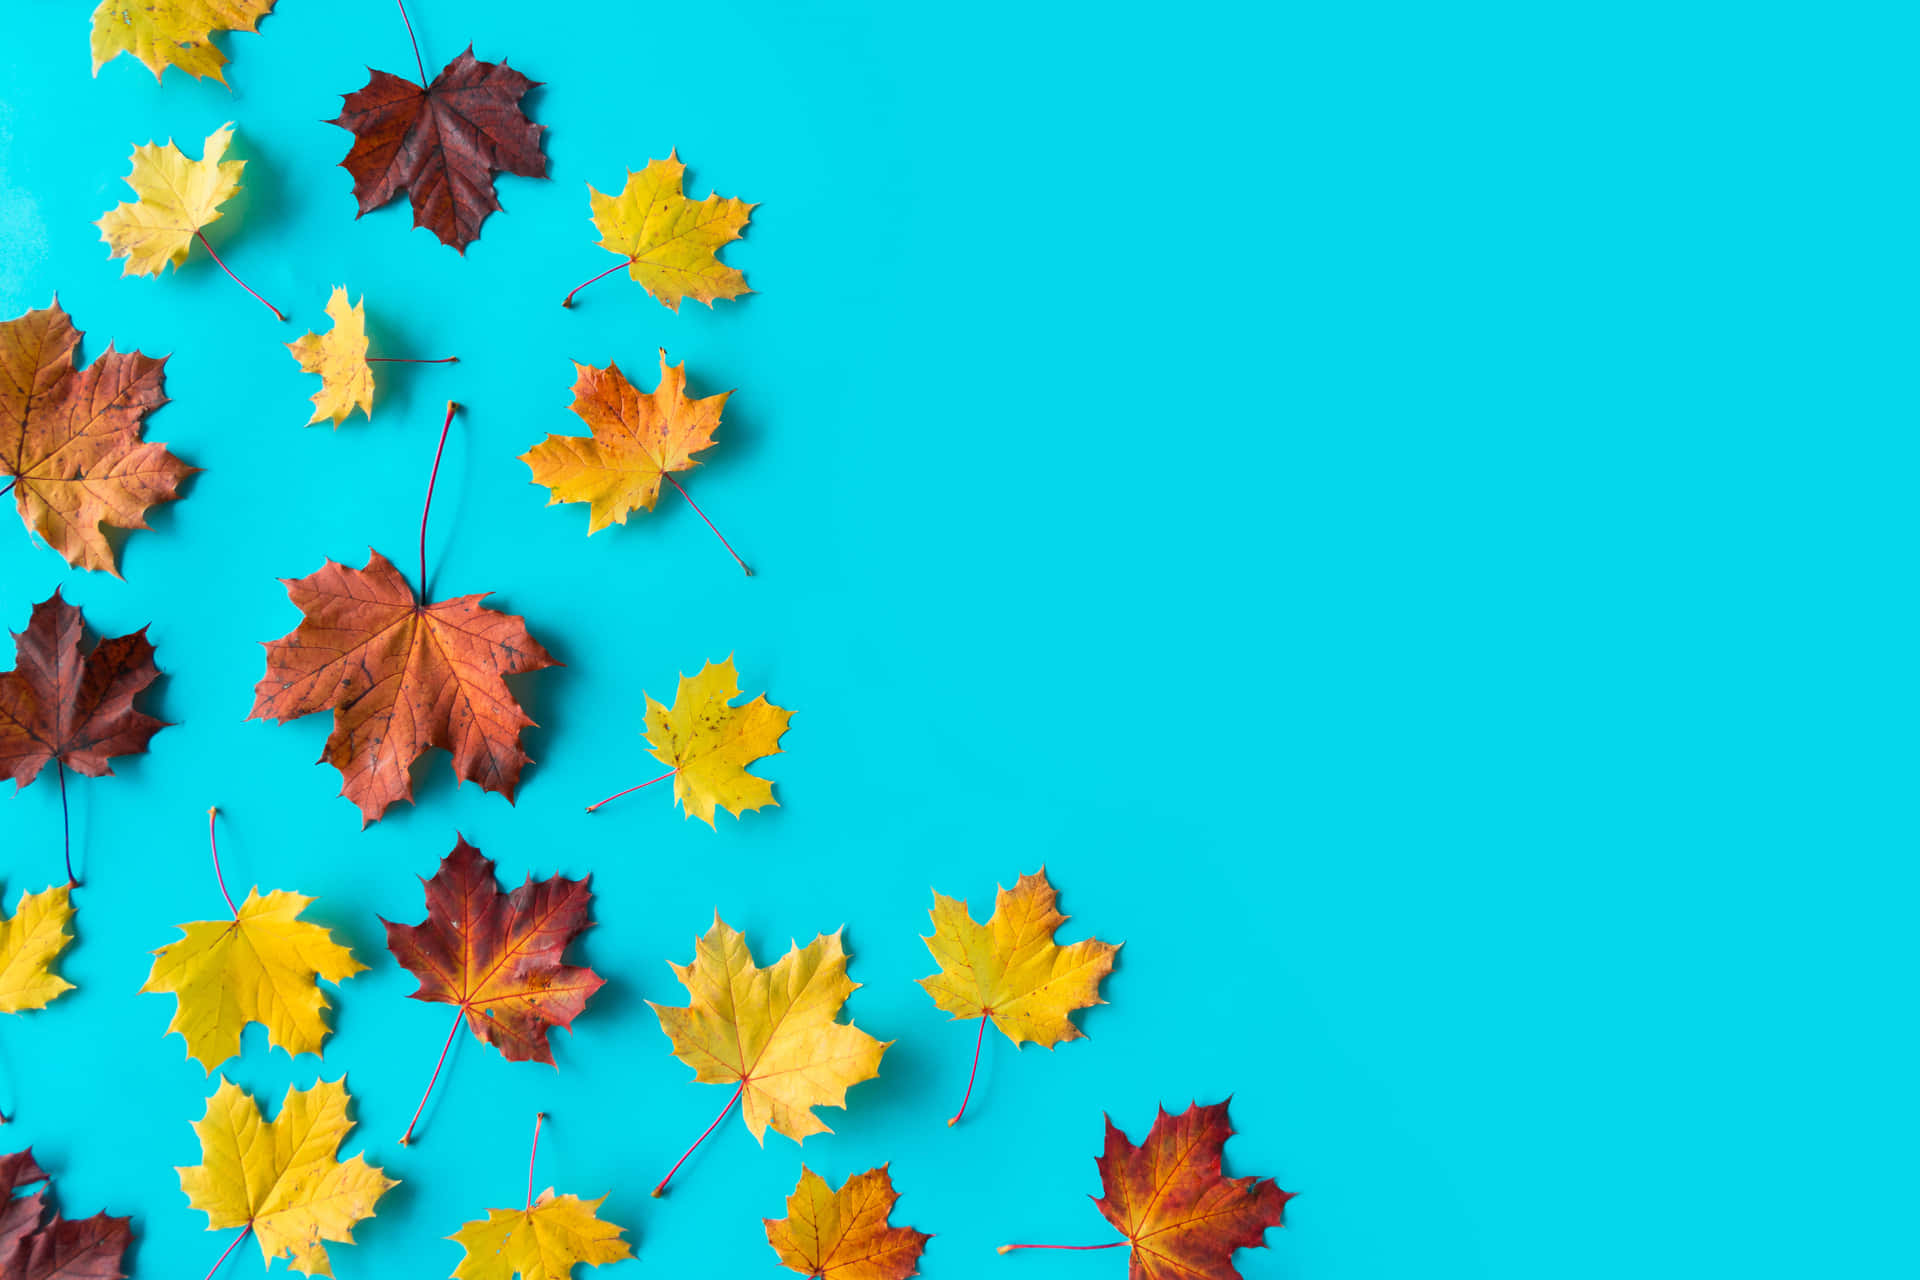 Image  Get in the Fall Mood with This Minimalist Autumn Scene Wallpaper